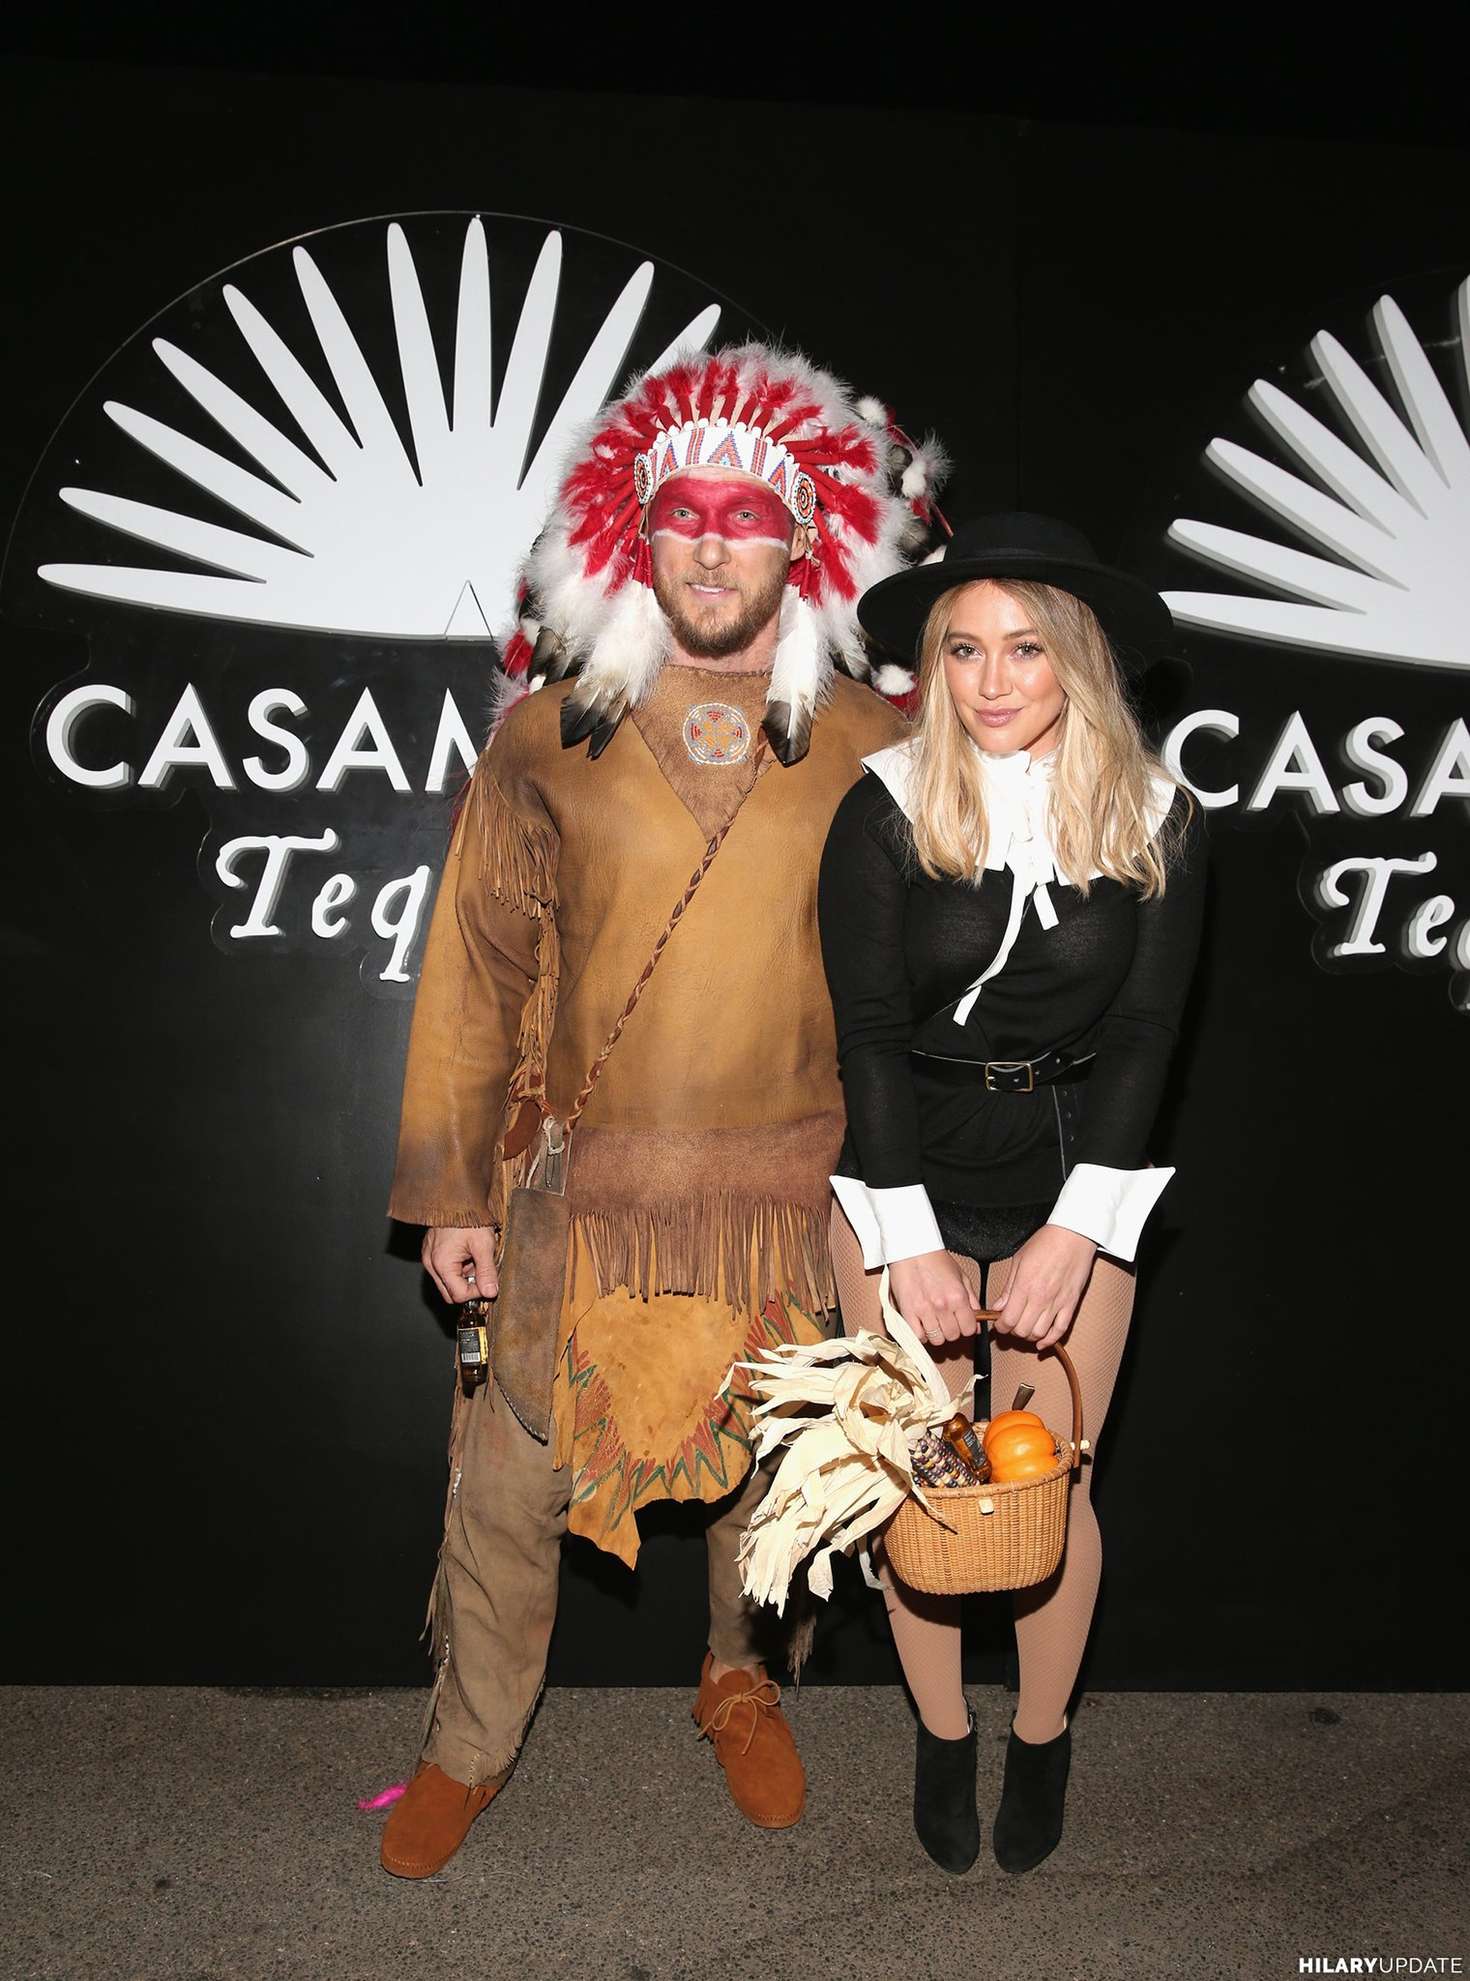 Hilary Duff 2016 : Hilary Duff: 2016 Casamigos Tequila Halloween Party -02